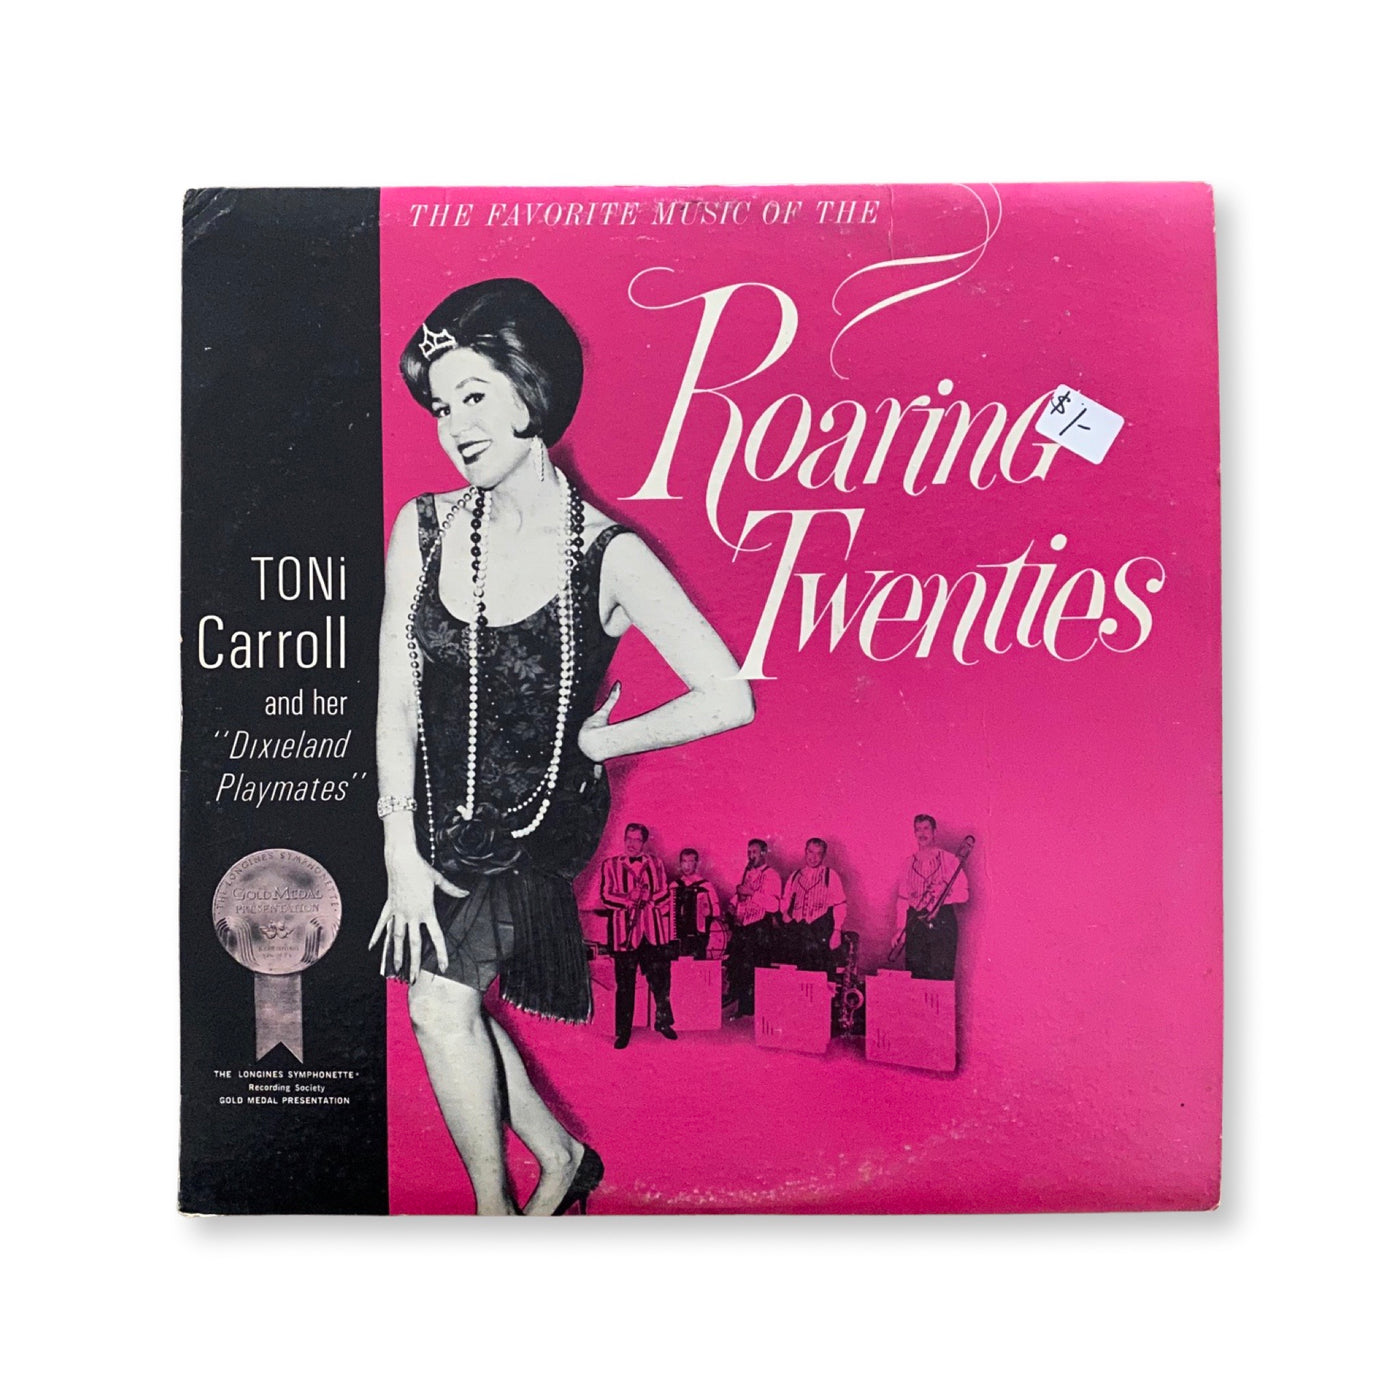 Toni Carroll And Her Dixieland Playmates - The Favorite Music Of The Roaring Twenties